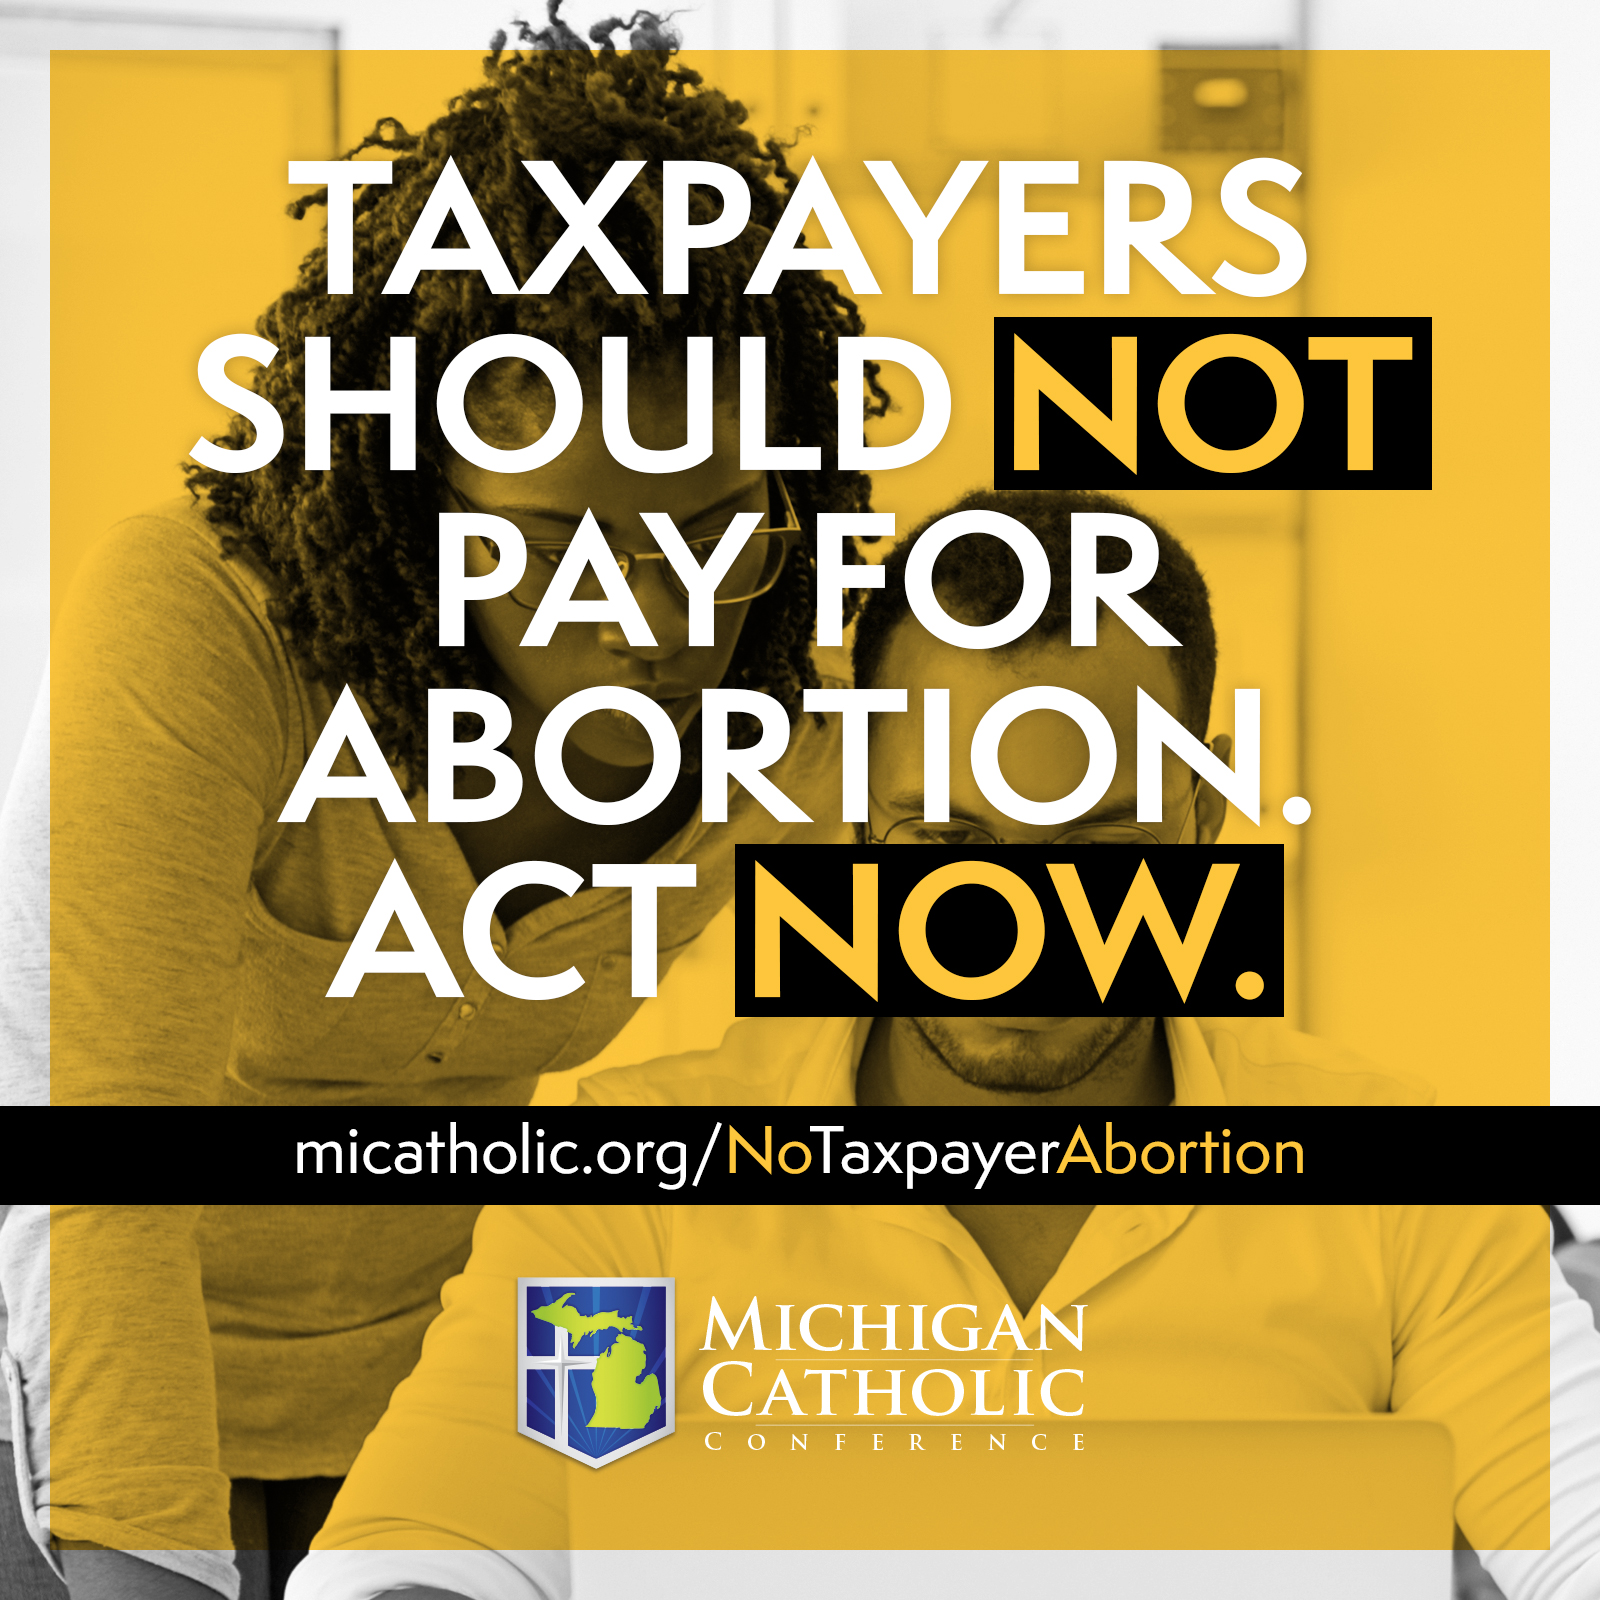 “Taxpayers should NOT pay for abortion. Act NOW.”